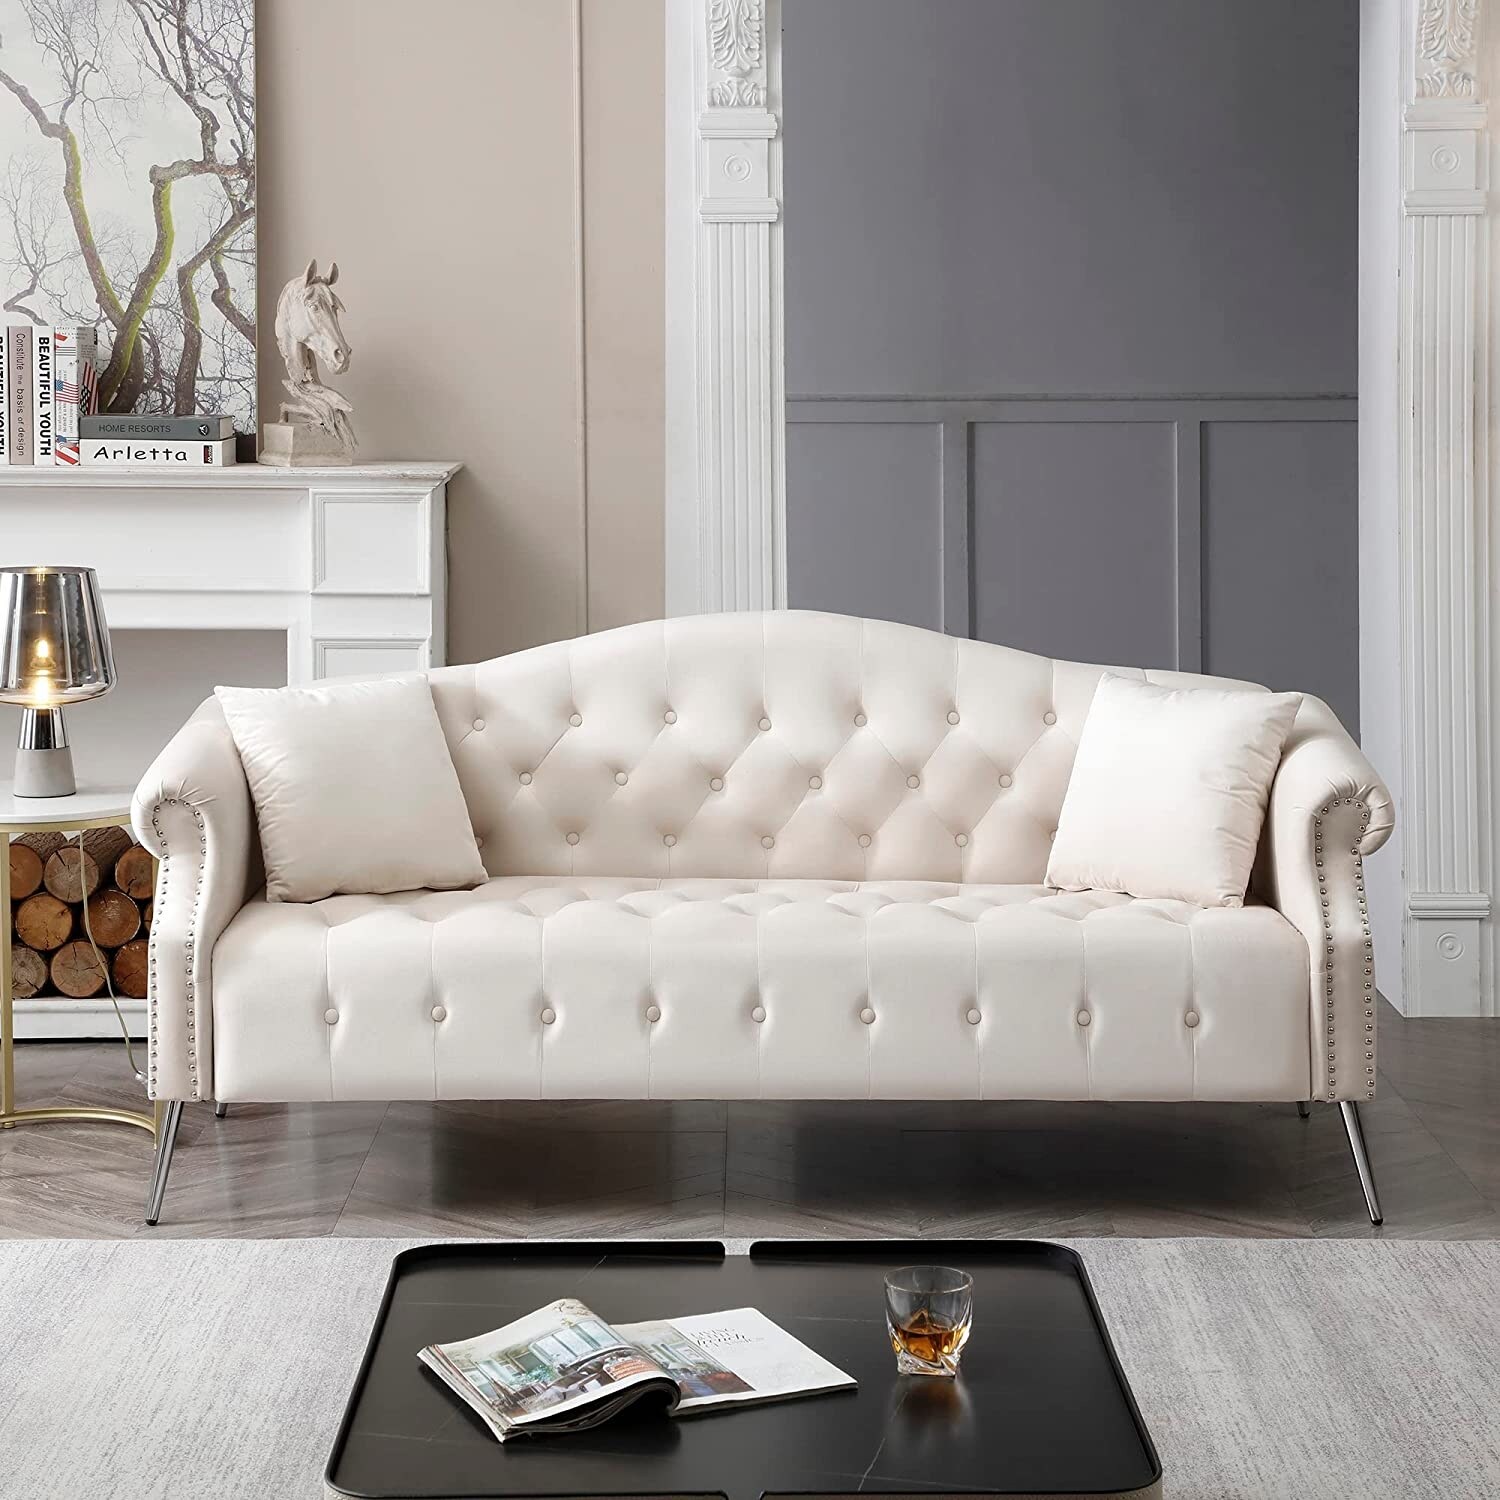 78.7" Velvet Chesterfield 3-Seat Sofa with 2 Pillows, Button Tufted Nailhead Curved Backrest Couch with Metal Legs - On Sale - Overstock 36781411